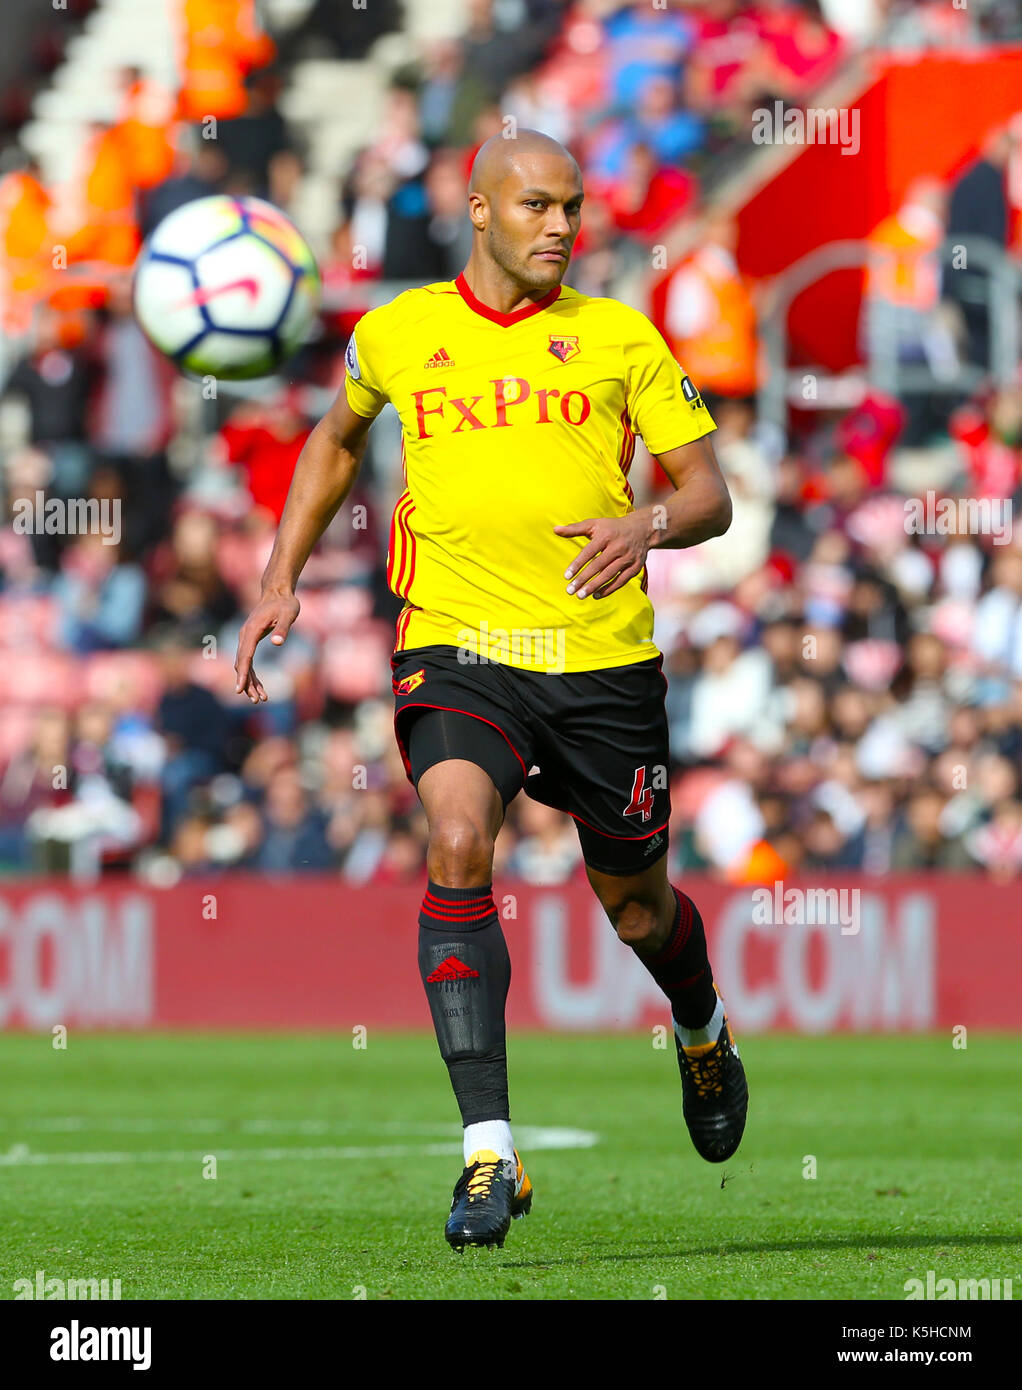 Watford's Younes Kaboulduring the Premier League match at St Mary's Stadium, Southampton. PRESS ASSOCIATION Photo. Picture date: Saturday September 9, 2017. See PA story SOCCER Southampton. Photo credit should read: Steven Paston/PA Wire. RESTRICTIONS: No use with unauthorised audio, video, data, fixture lists, club/league logos or 'live' services. Online in-match use limited to 75 images, no video emulation. No use in betting, games or single club/league/player publications. Stock Photo